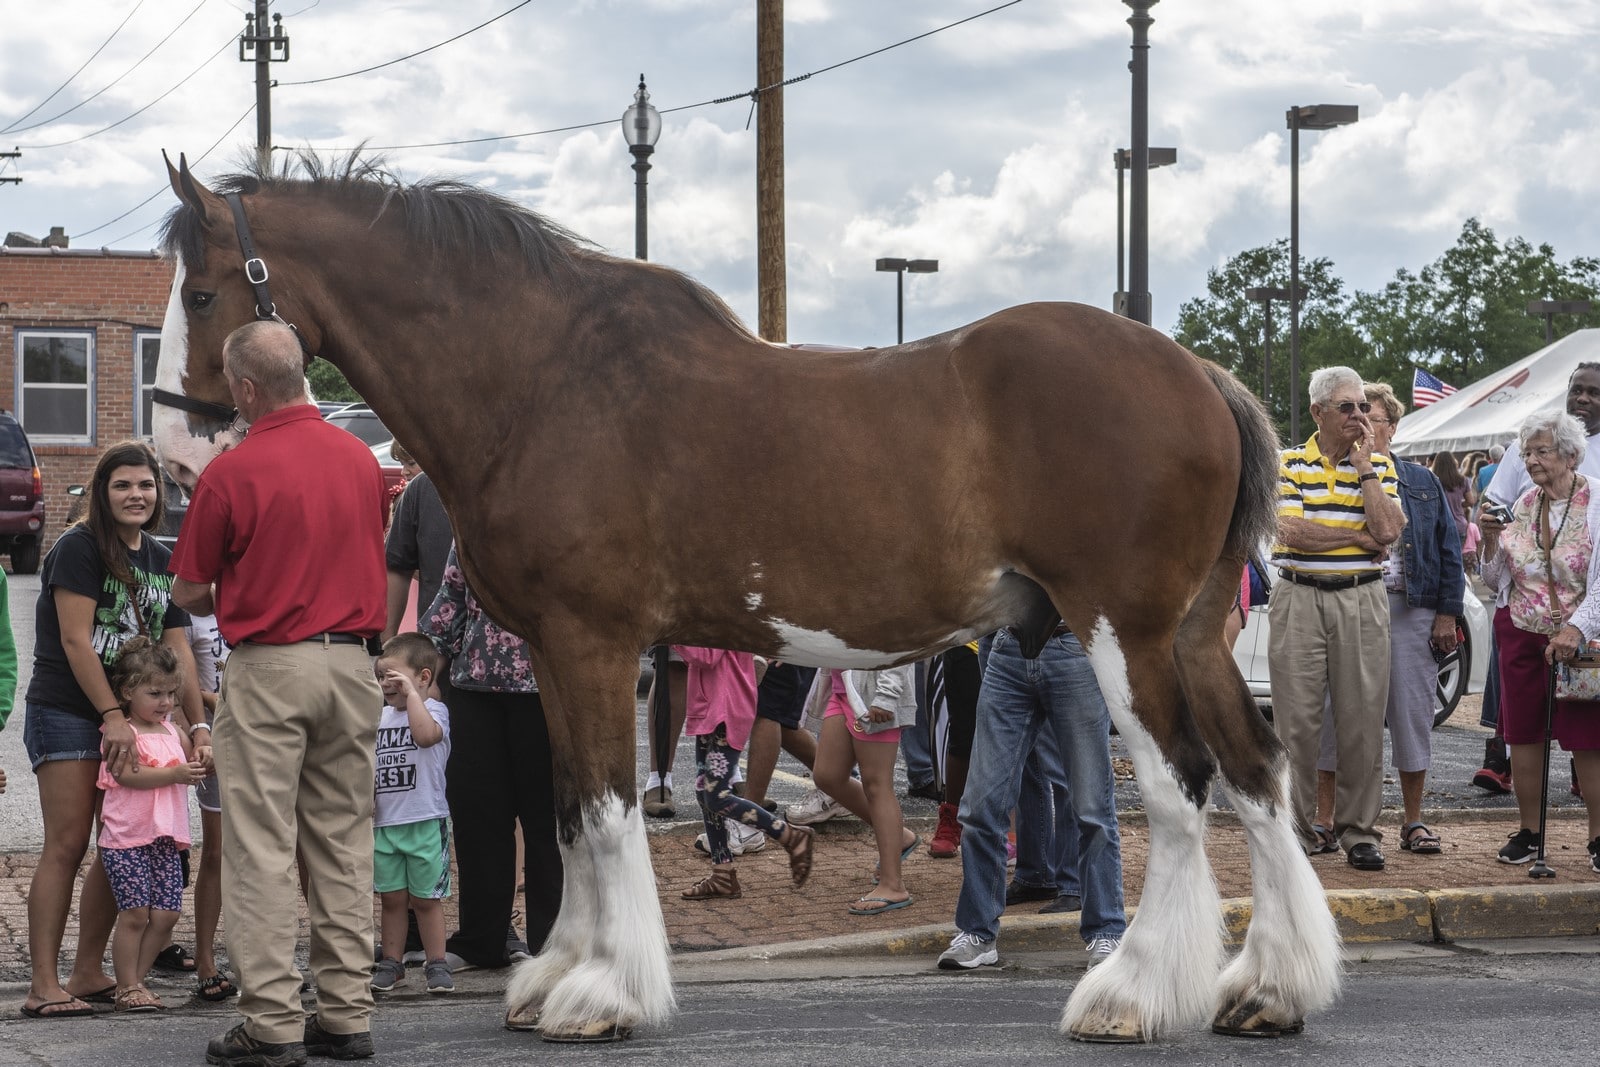 A large Clydesdale horse stands in the street surrounded by a group of people during a parade